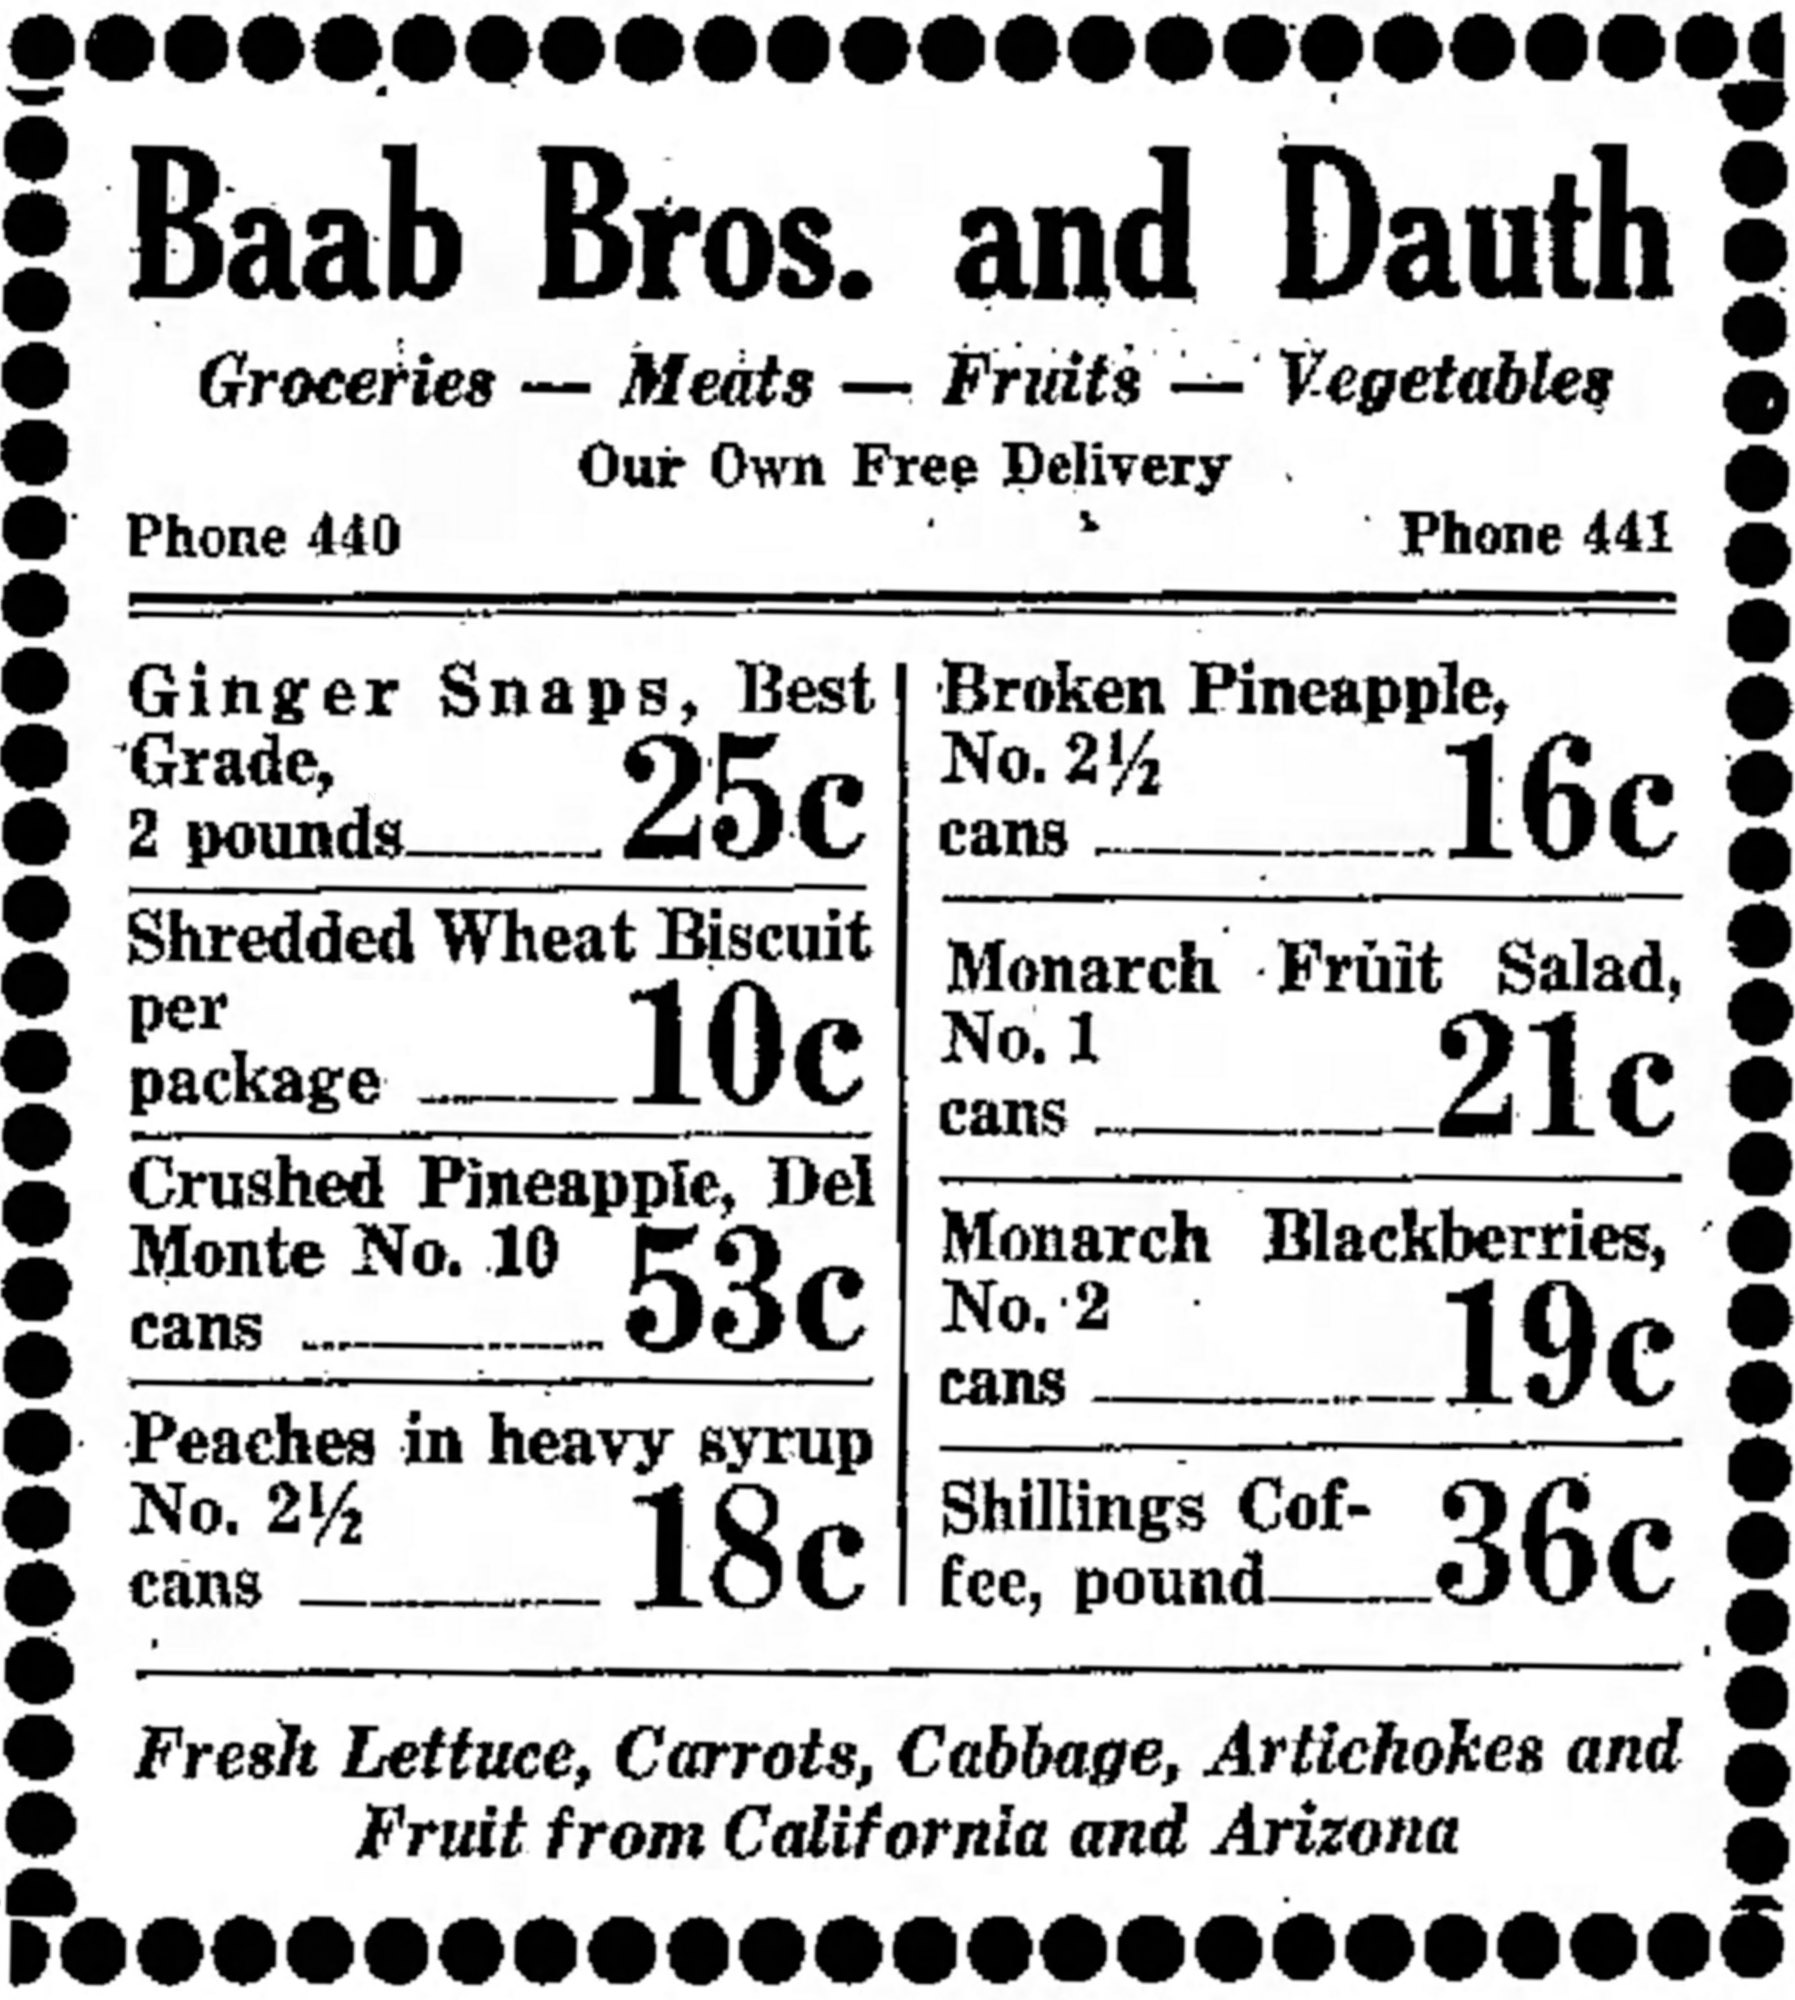 Dauth Family Archive - 1932-03-16 - Greeley Daily Tribune - Baab Bros and Dauth Advertisement